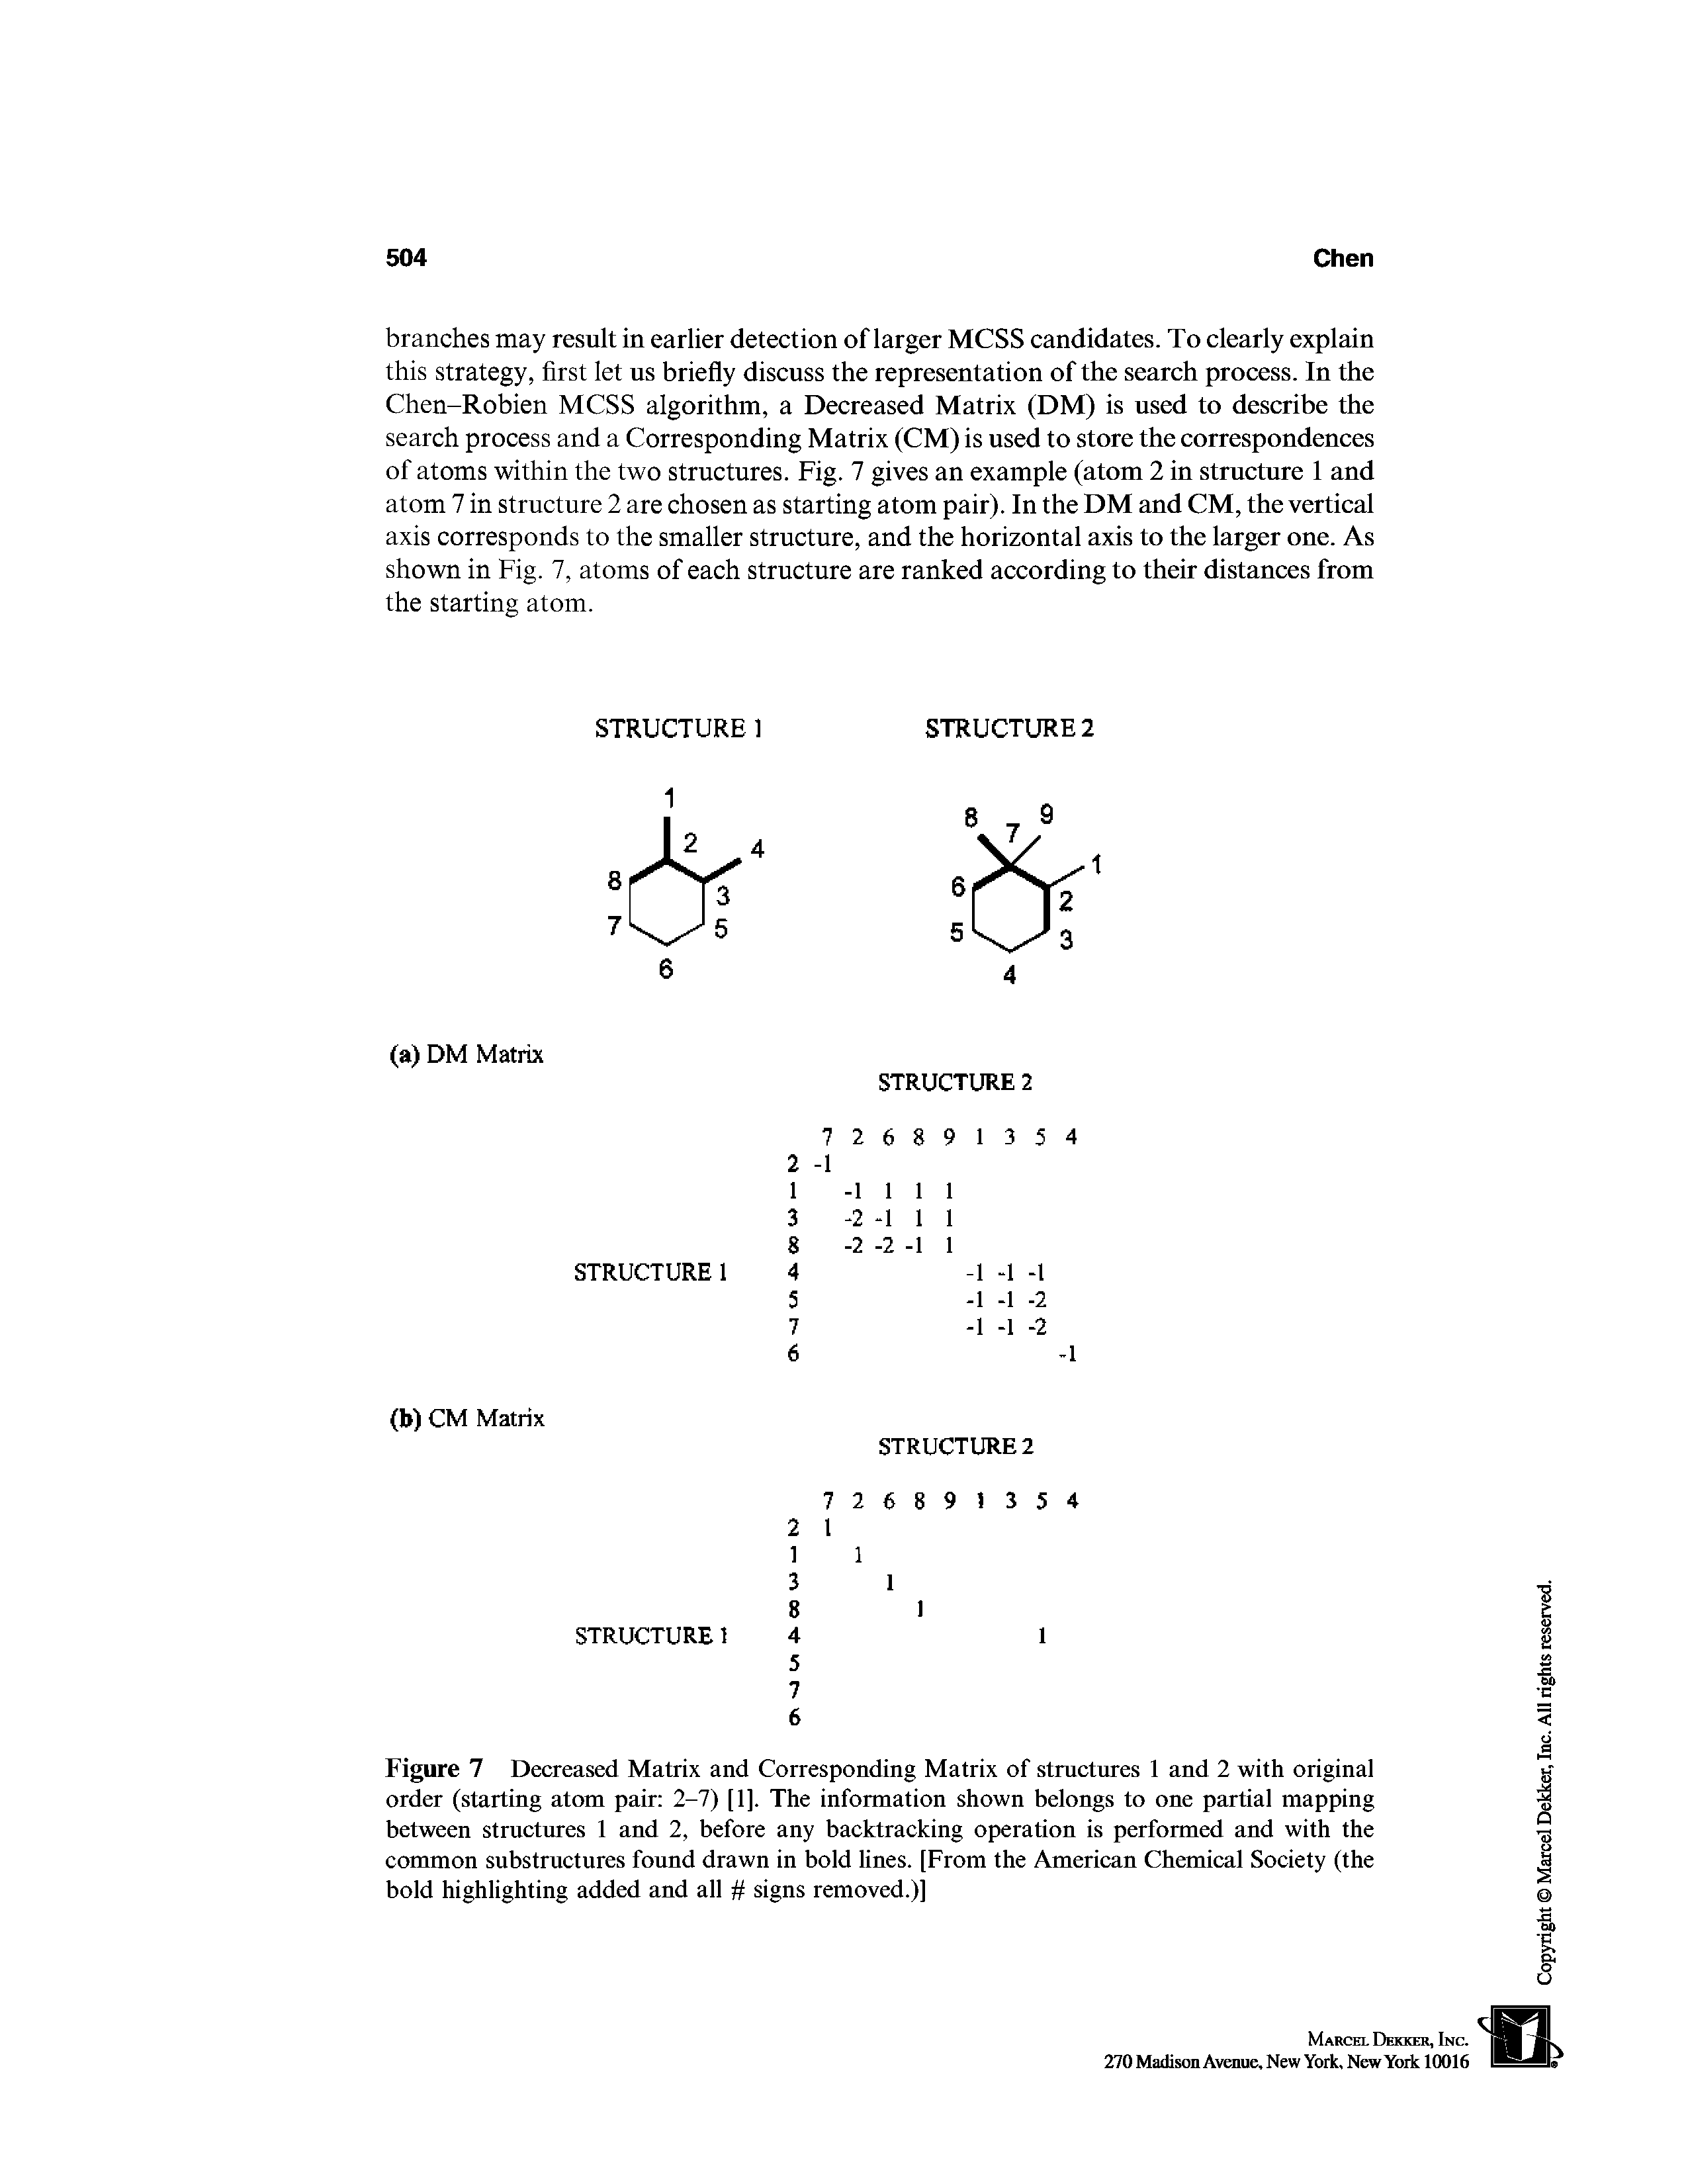 Figure 7 Decreased Matrix and Corresponding Matrix of structures 1 and 2 with original order (starting atom pair 2-7) [1]. The information shown belongs to one partial mapping between structures 1 and 2, before any backtracking operation is performed and with the common substructures found drawn in bold lines. [From the American Chemical Society (the bold highlighting added and all signs removed.)]...